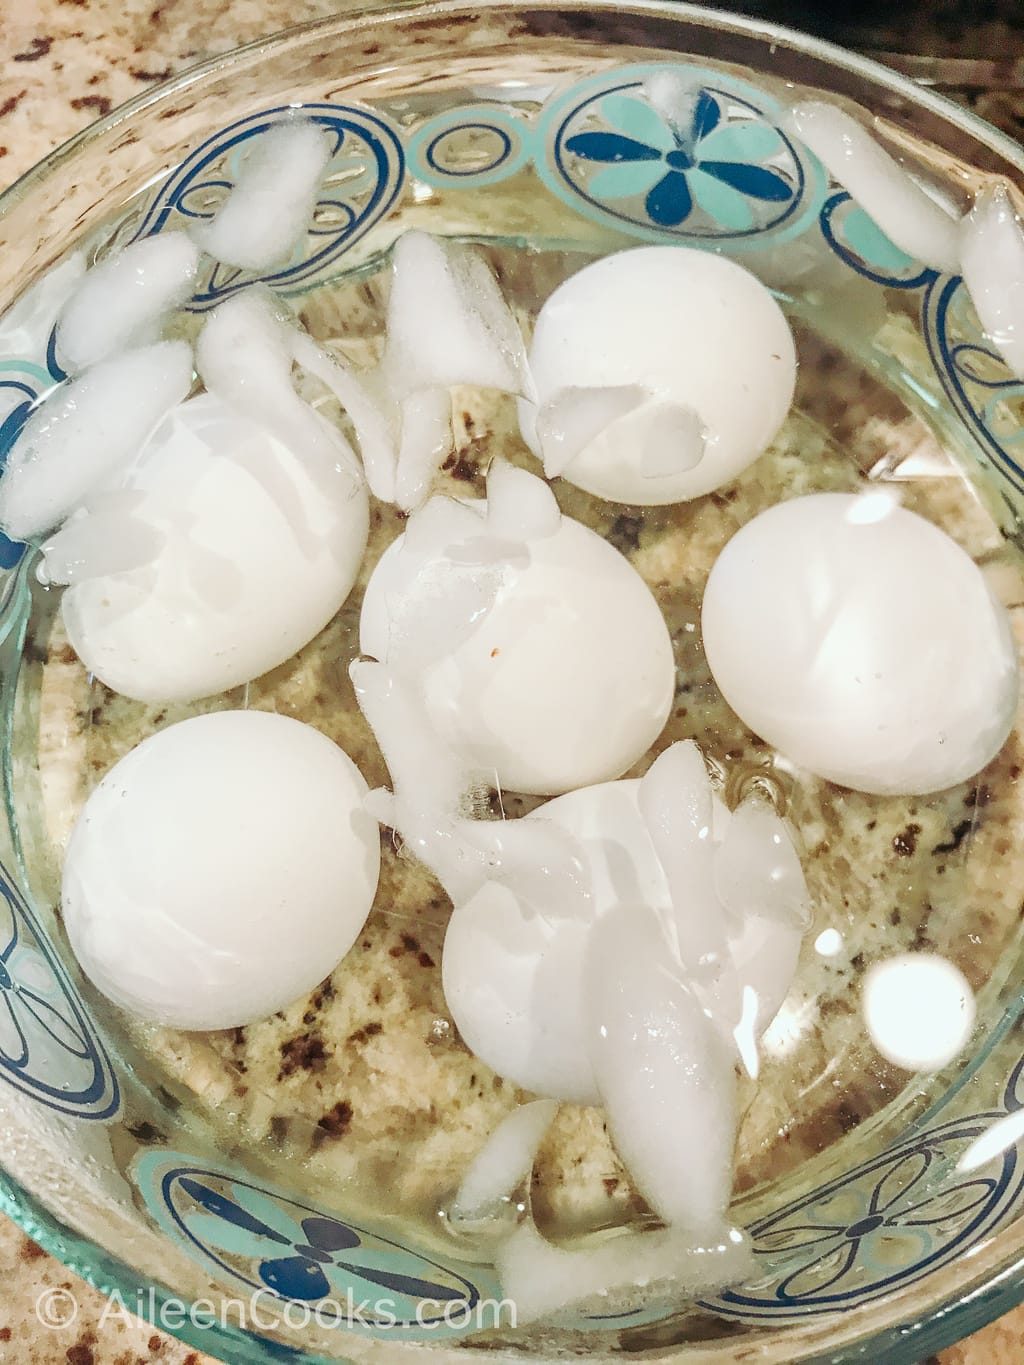 Eggs inside ice water with ice melted.